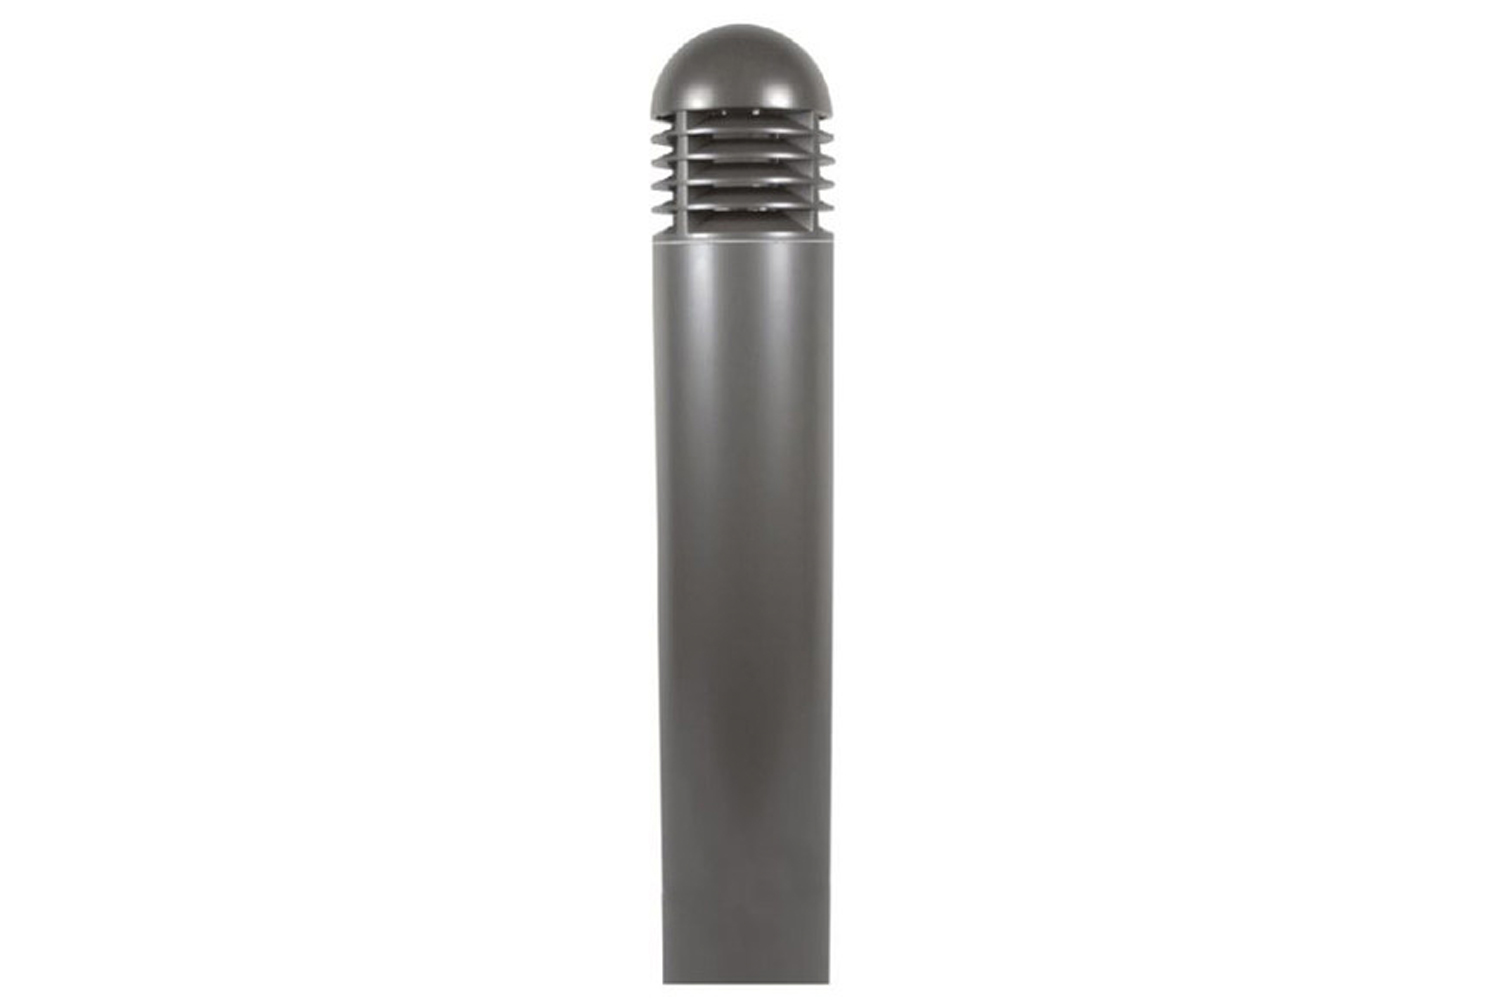 These bollard lights have a heavy-duty dome-top shape with a classic appearance appropriate for various locations 